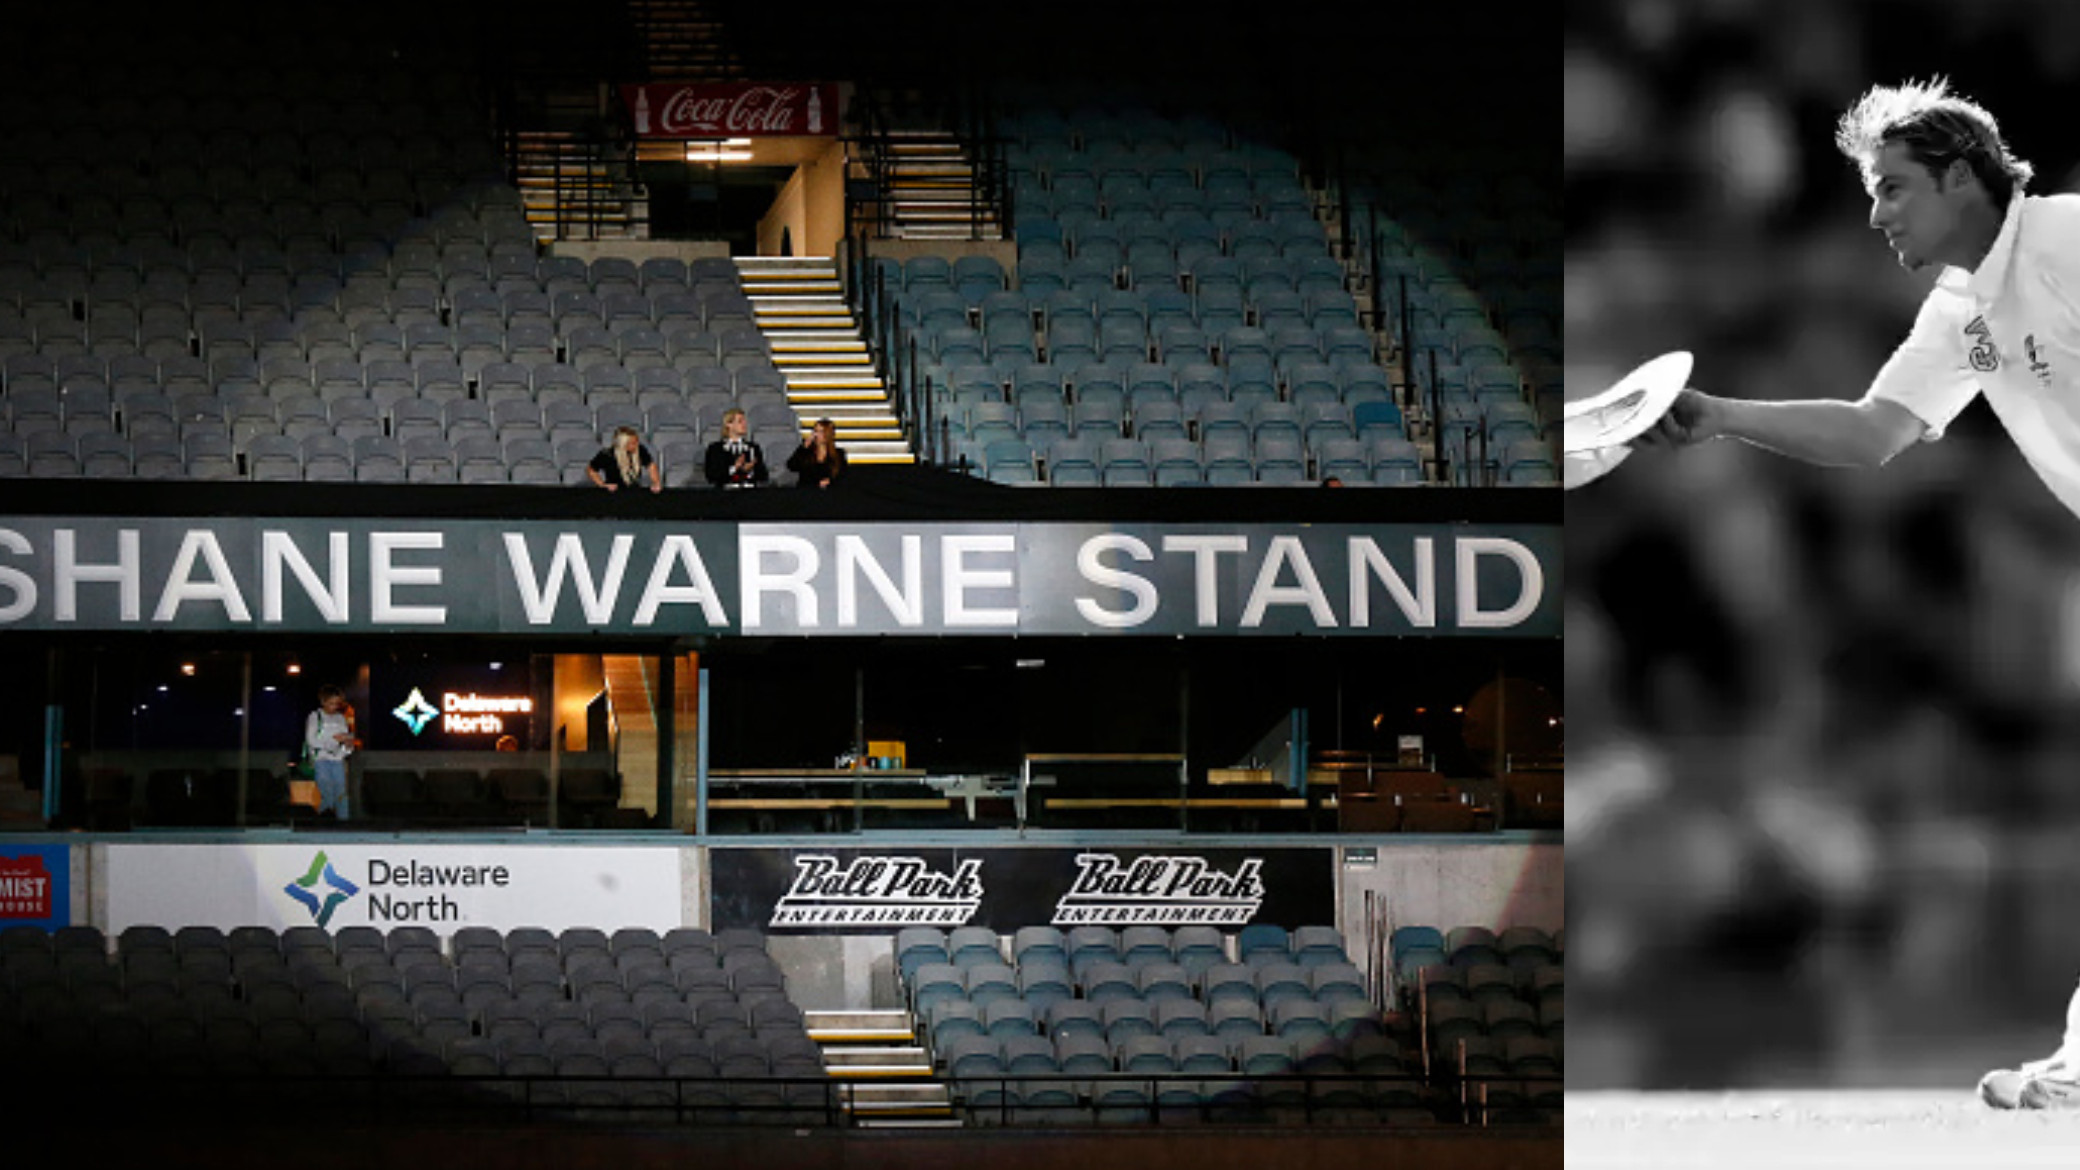 Shane Warne given an emotional farewell at the MCG; stand named after him unveiled